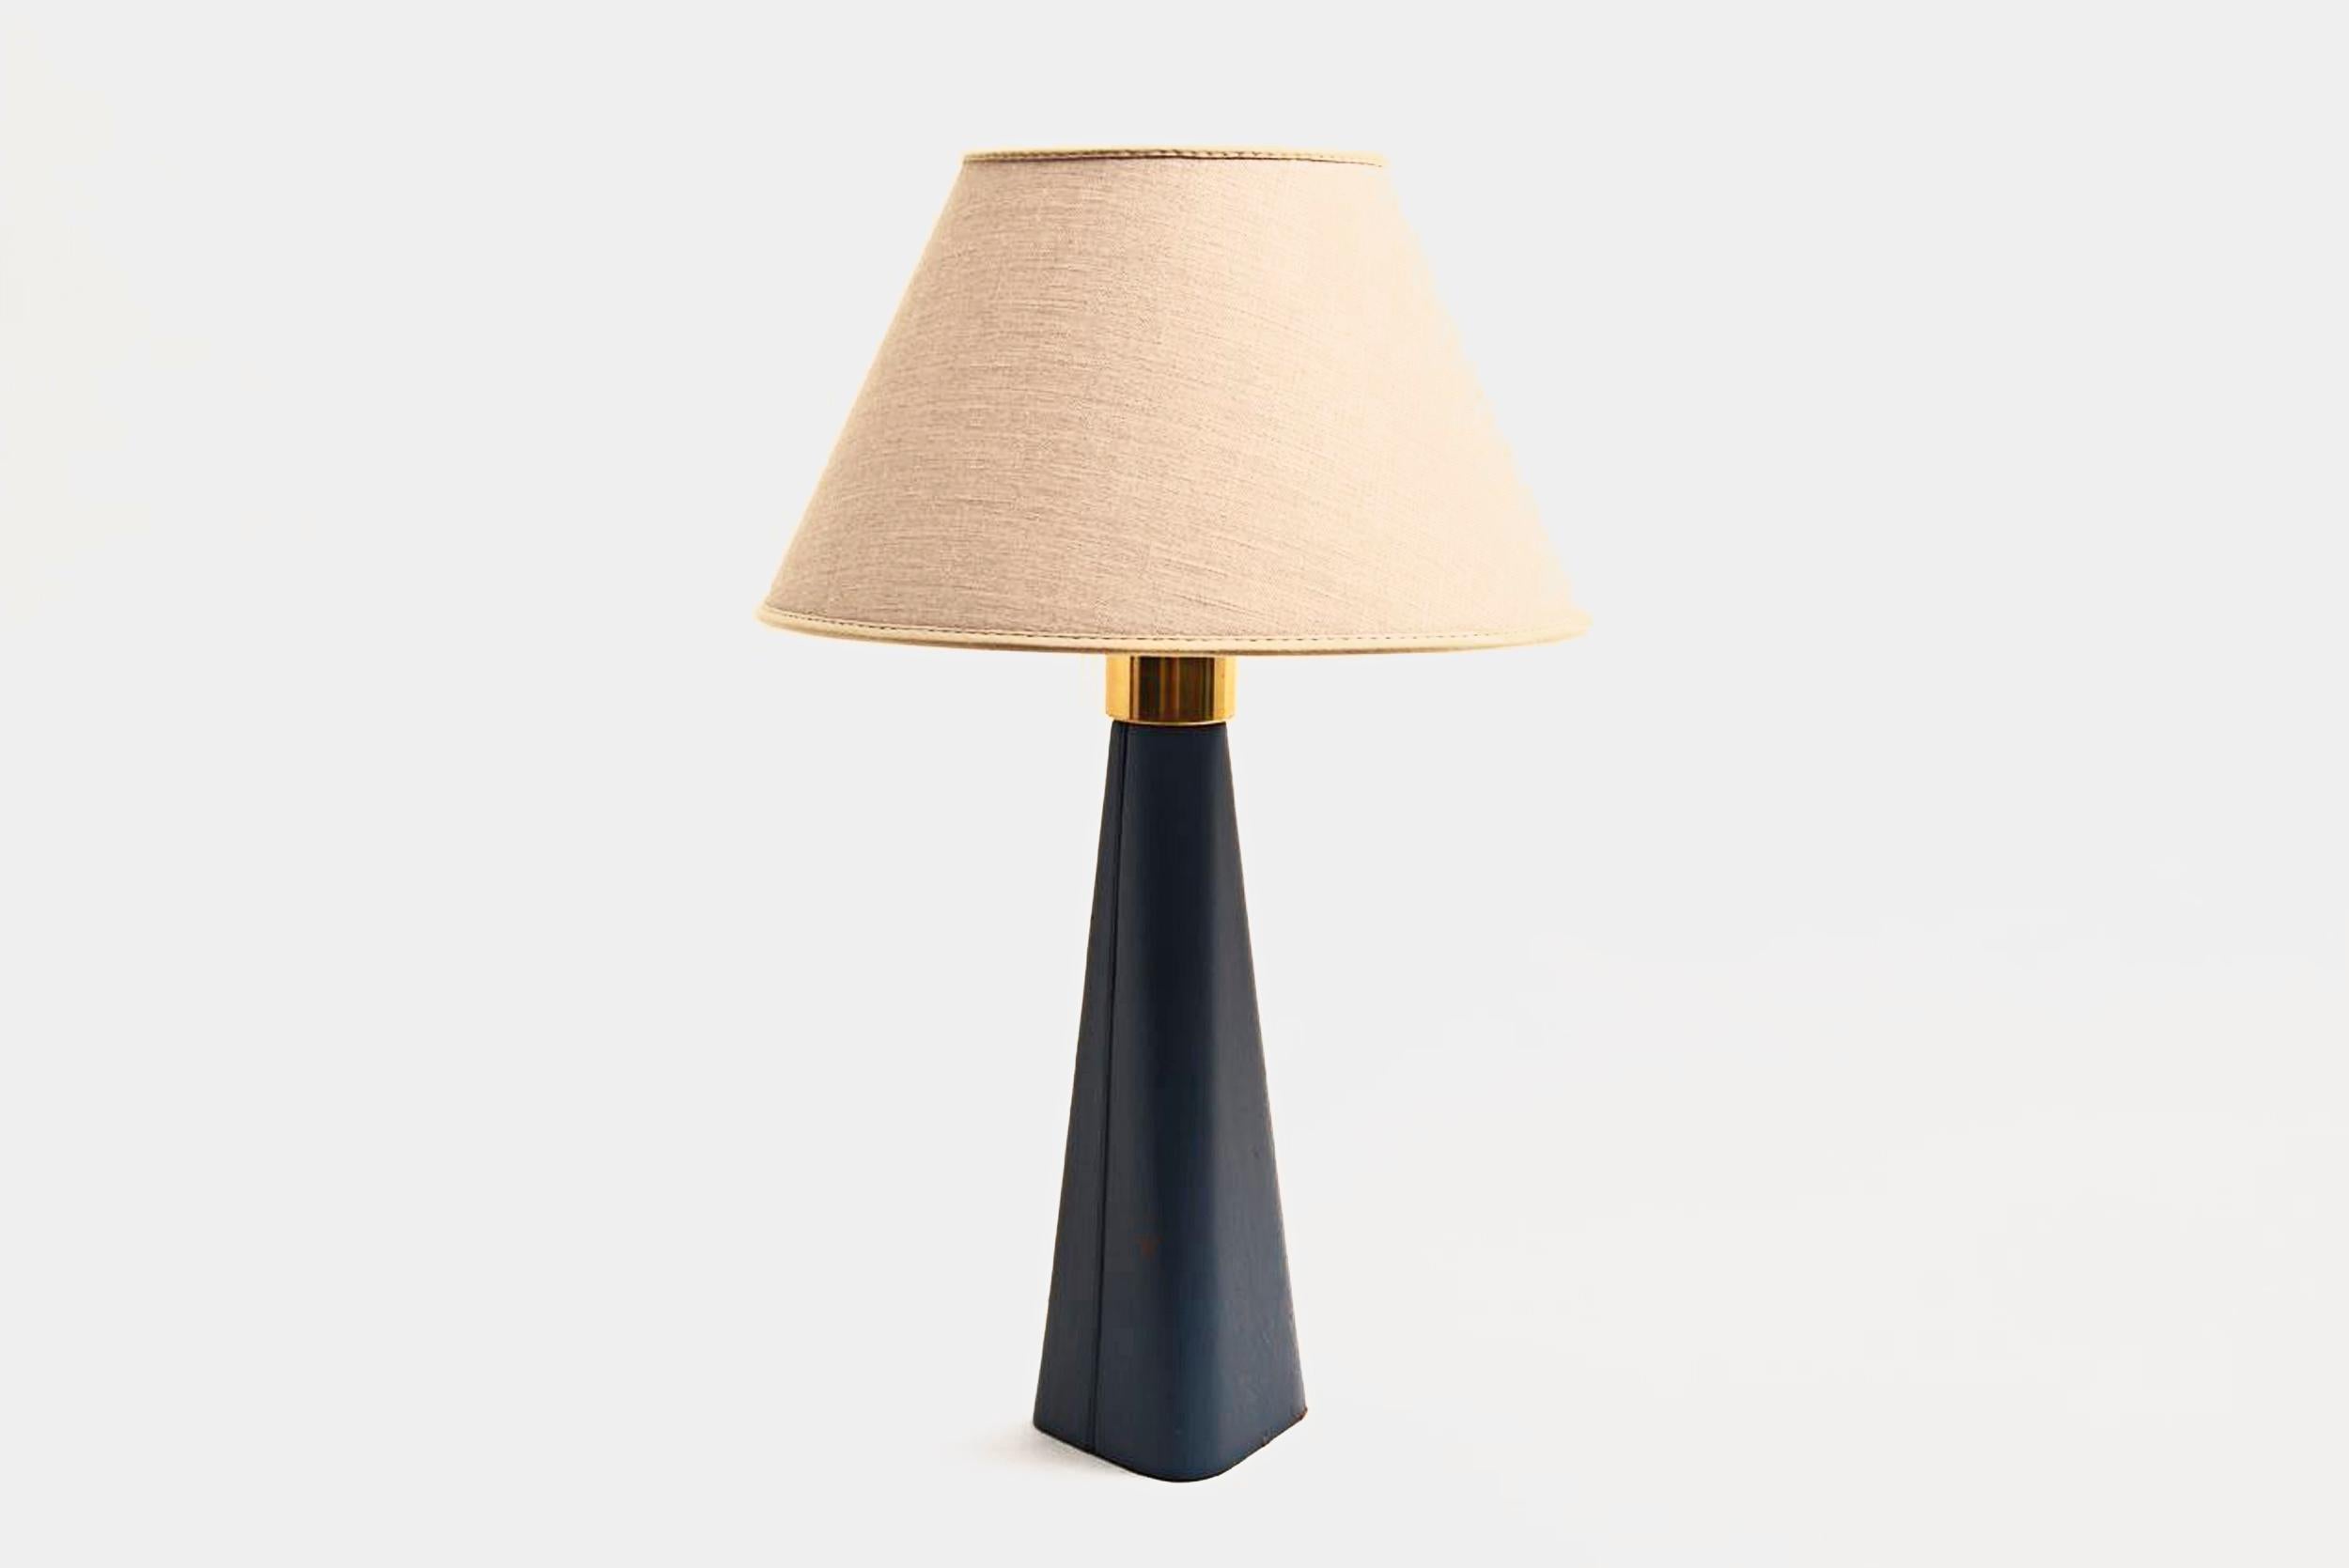 Lisa Johansson-Pape
Table lamp
Manufactured by Orno
Finland, 1950
Brass, leather, canvas shade
From the archives of Side Gallery. Barcelona

Measurements
10 cm x 10 cm x 69 H cm
3.93 in x 3.93 in x 27.10 H in

Literature
Design Musuem,